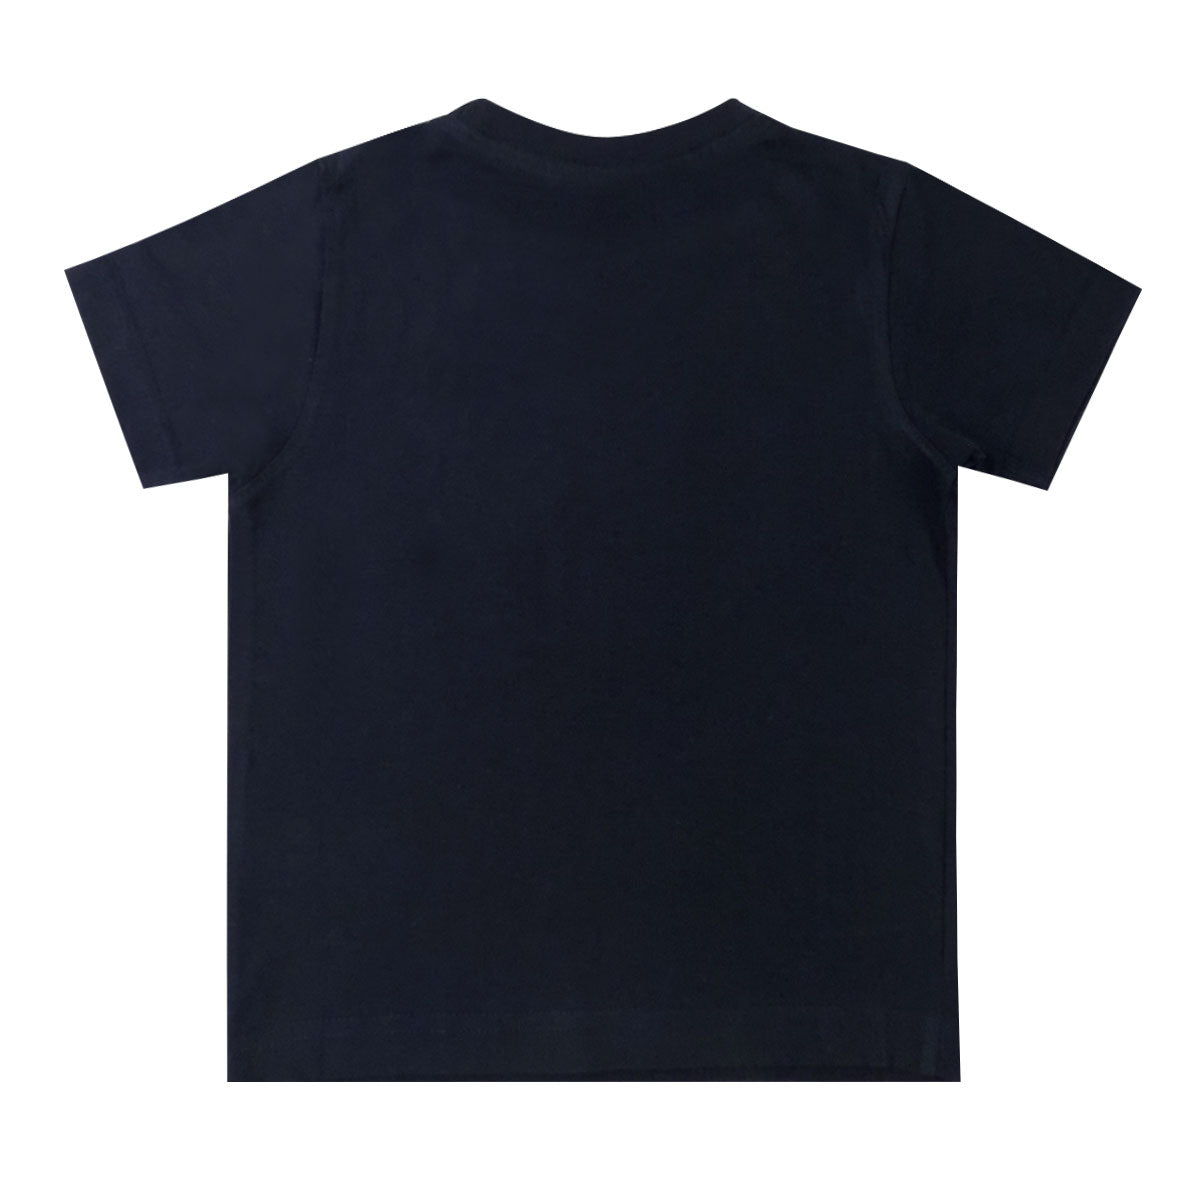 Always With A Smile - Premium Round Neck Cotton Tees for Kids - Navy Blue